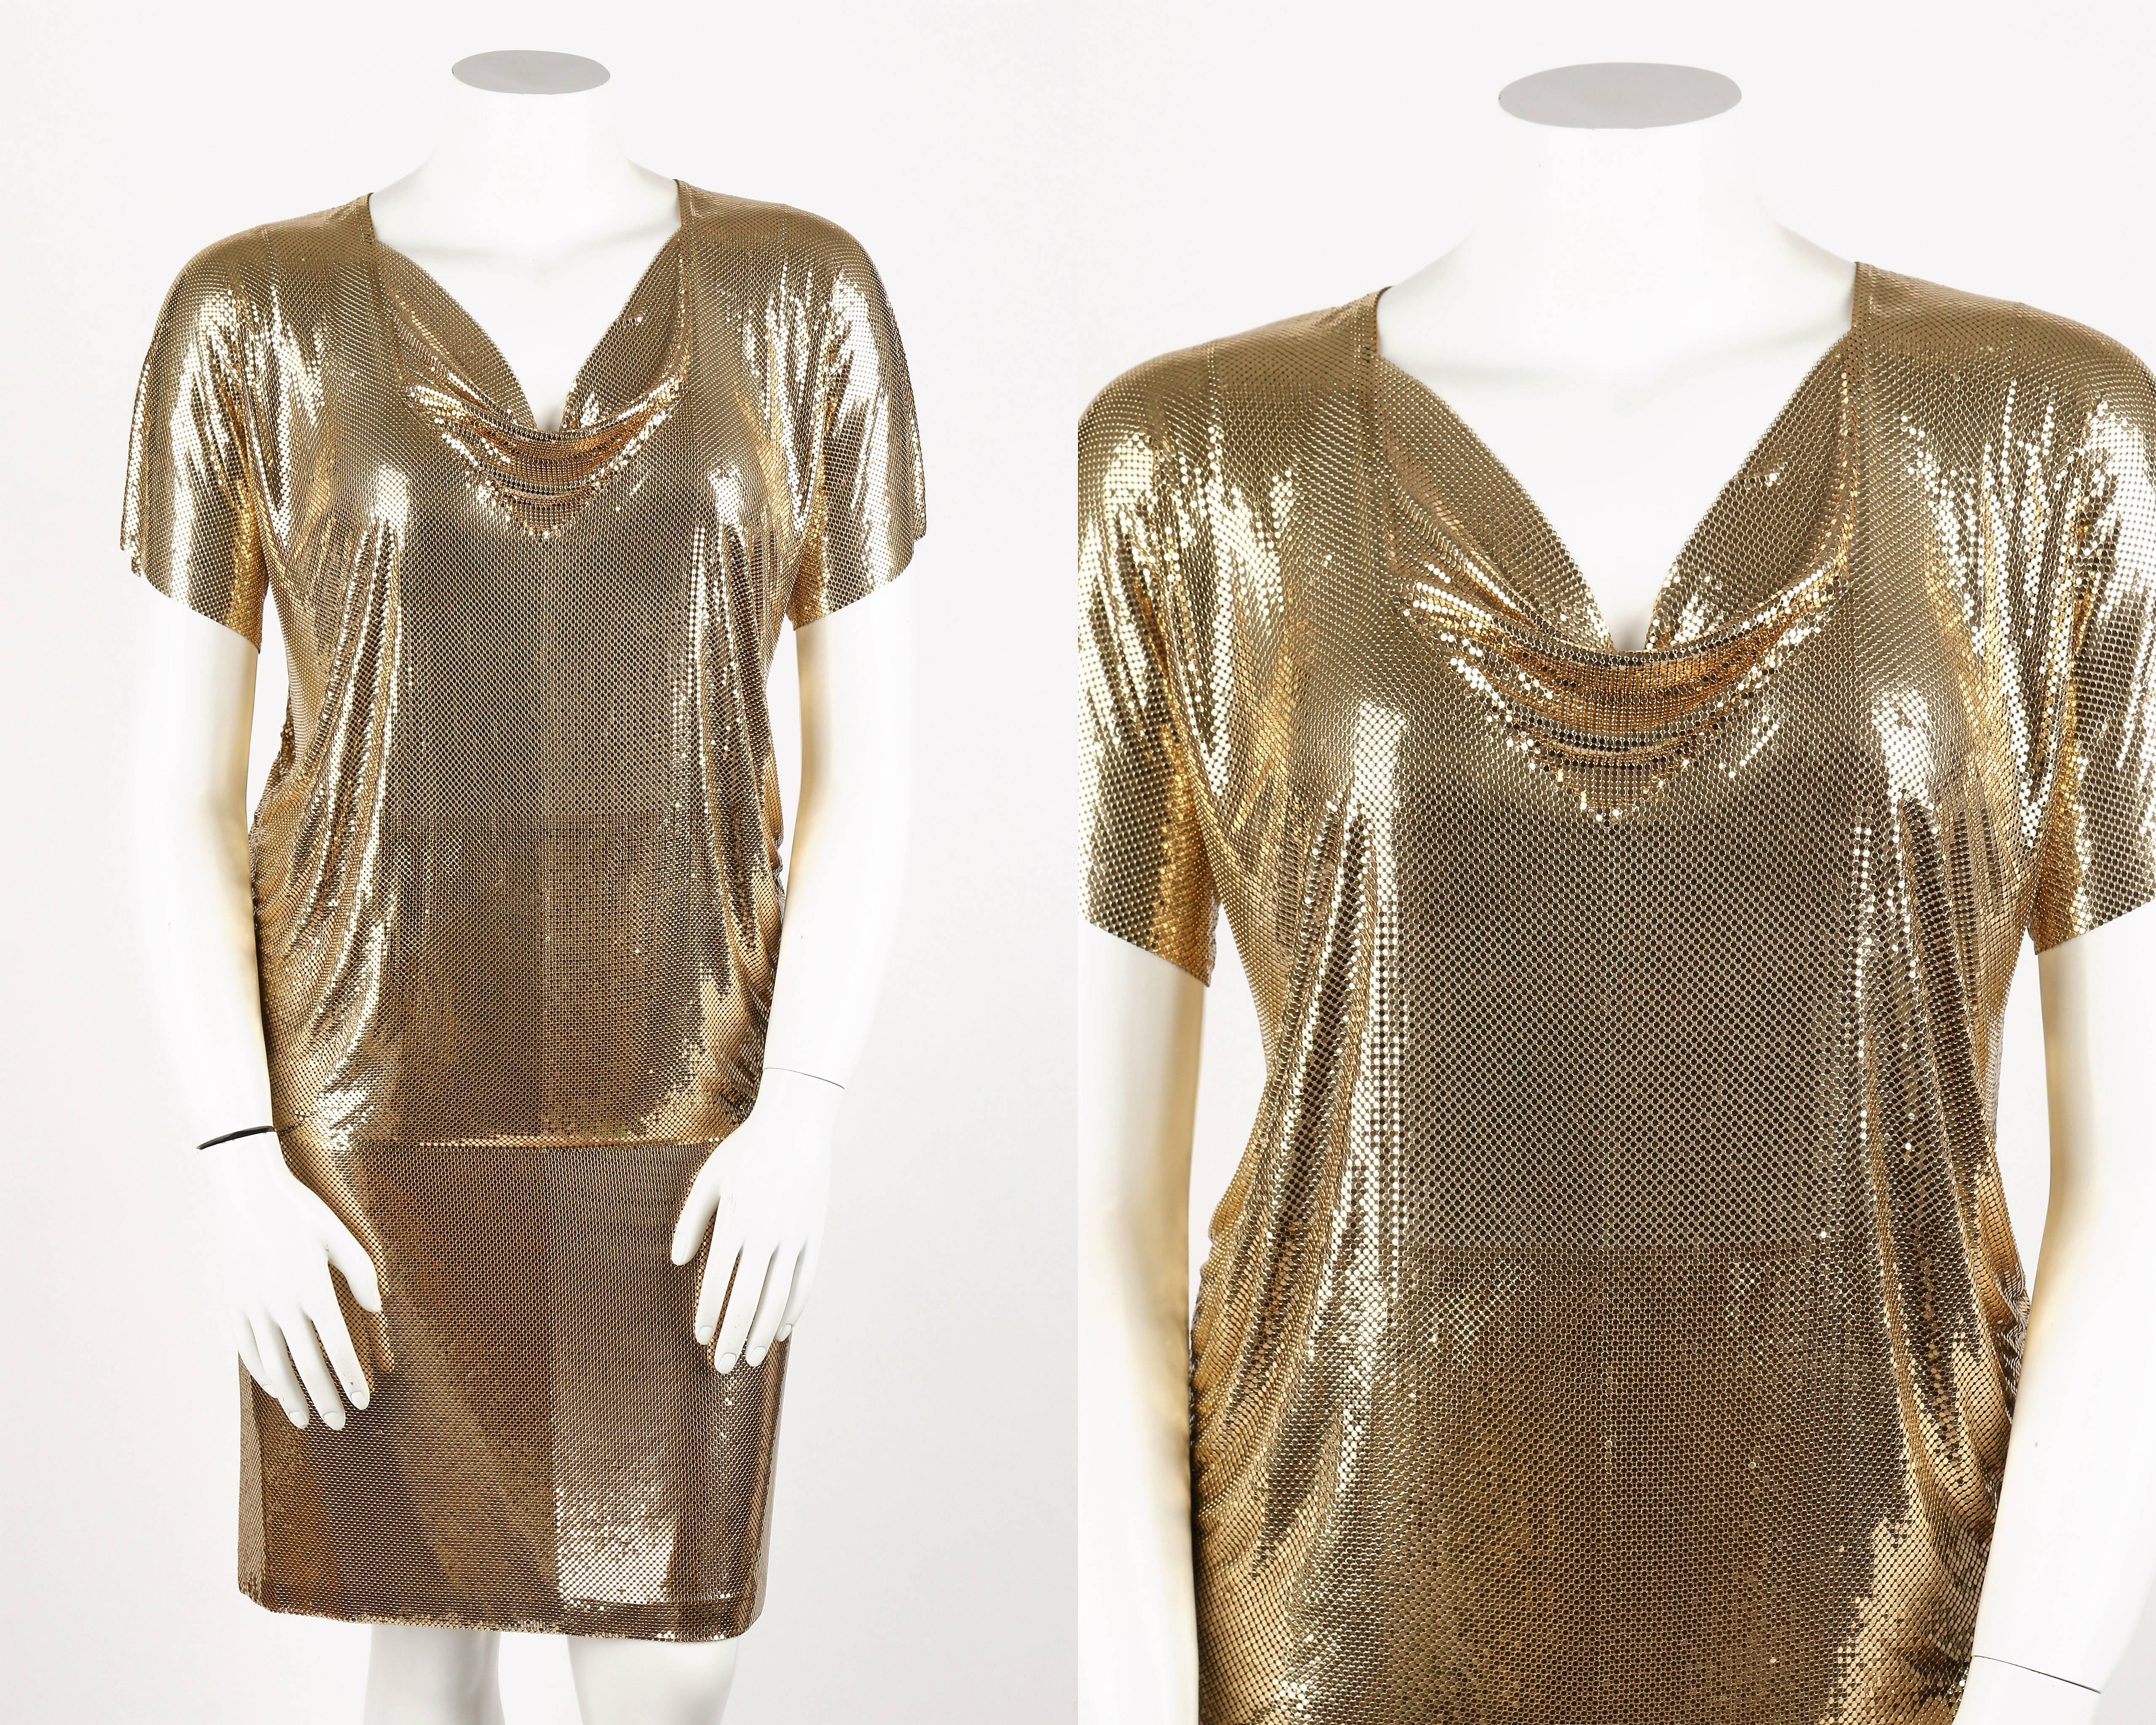 Vintage c.1970's Whiting and Davis two piece gold metal mesh cowl neck top and skirt set. Short dolman sleeved top. Cowl neckline. Gathered side seams. Center back zipper closure with hook and eye at top. Straight skirt has adjustable grosgrain